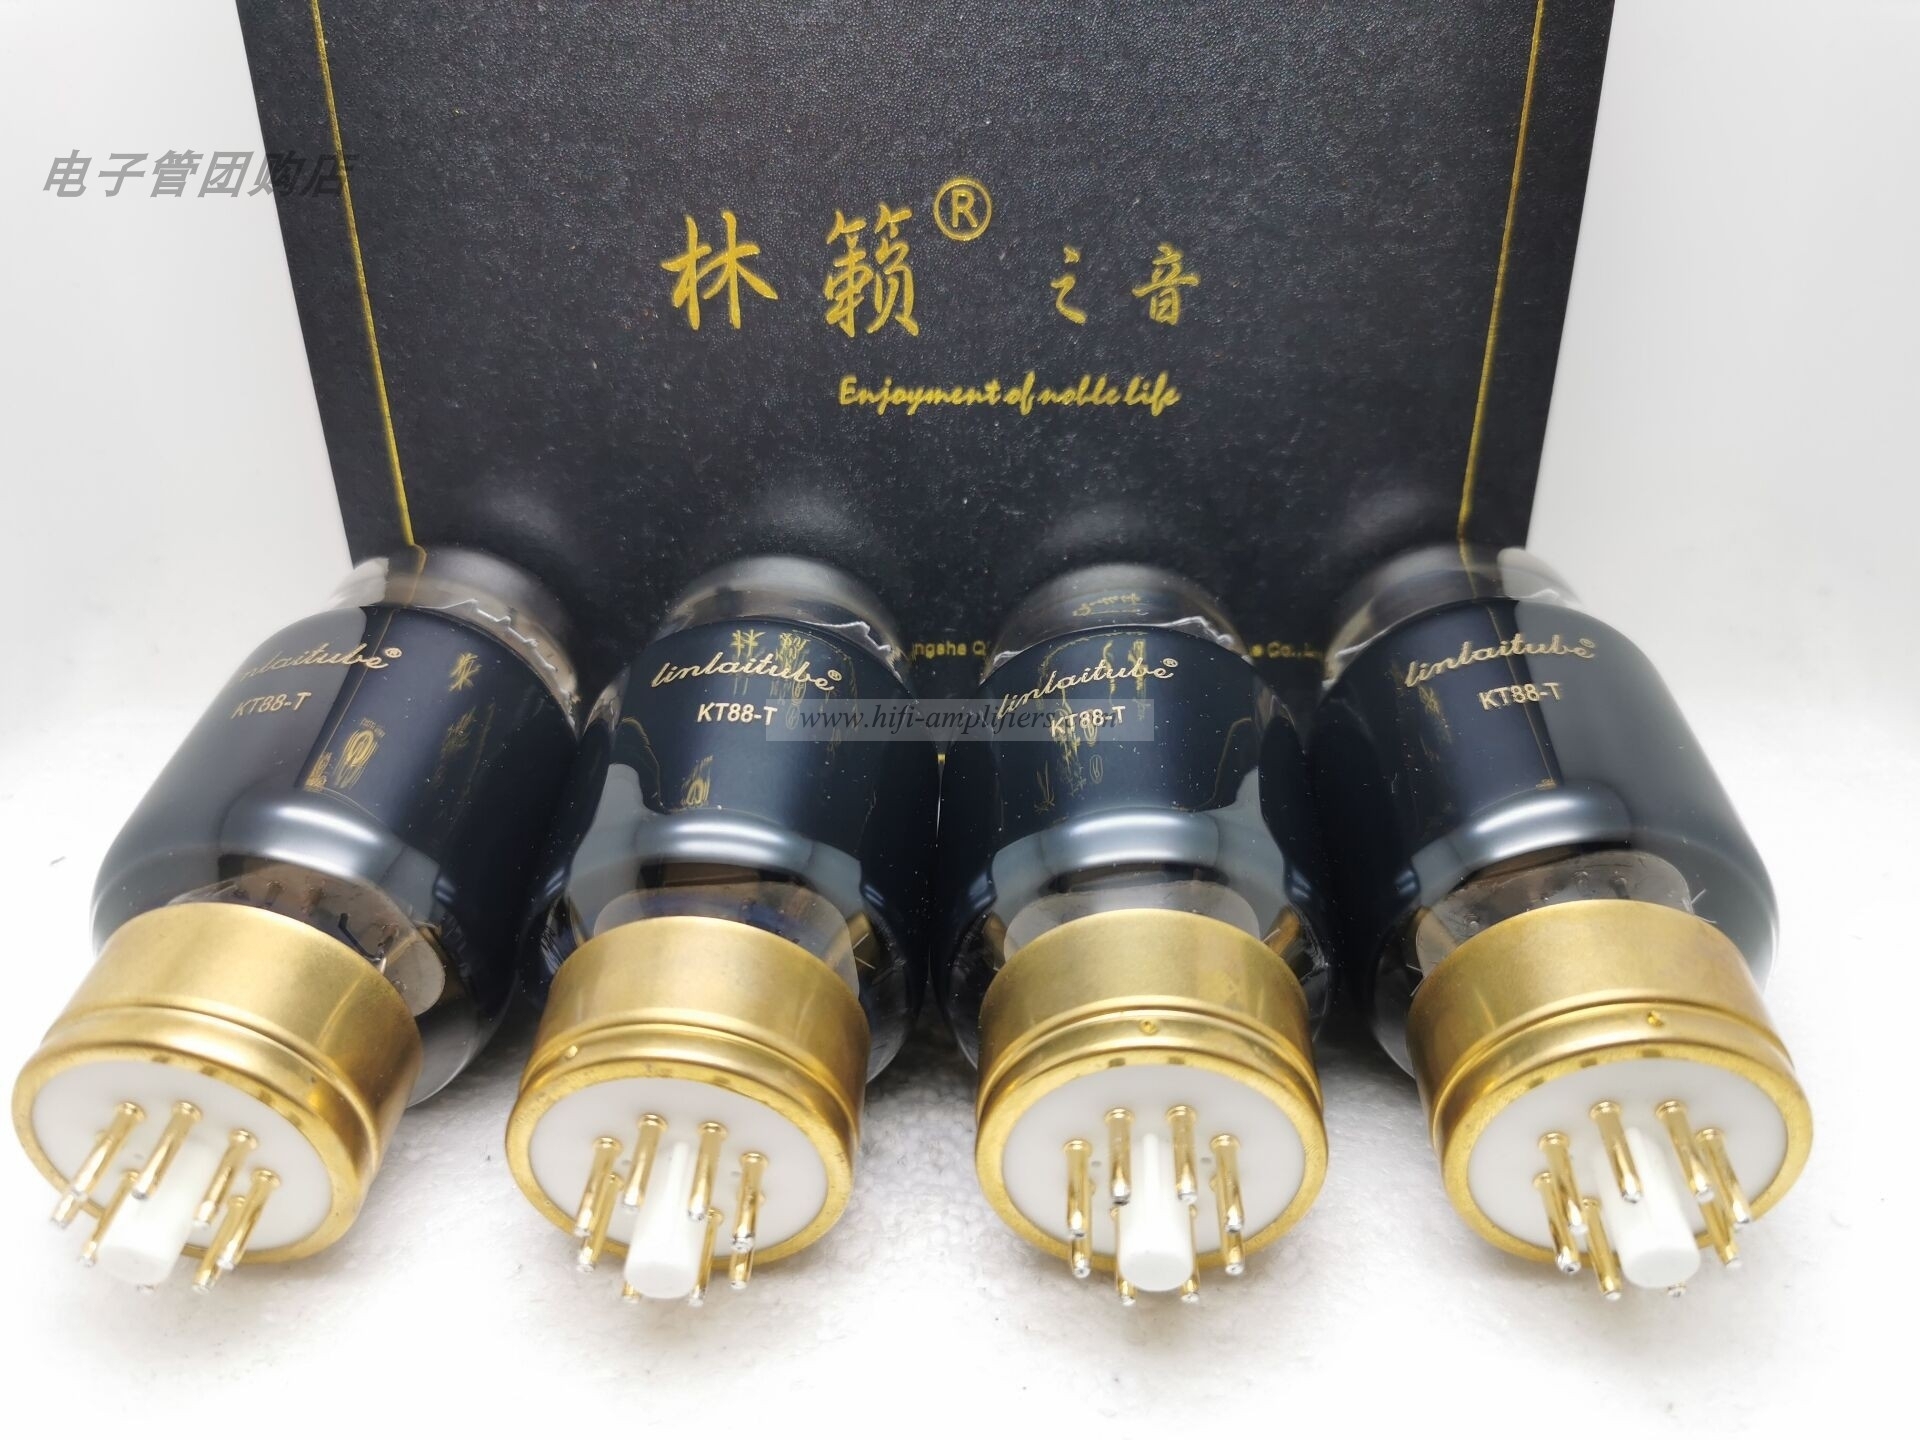 LINLAI Vacuum Tube KT88-T KT88T HIFI Audio Valve Replaces KT88 KT120 6550 Electronic Tube Matched Pair